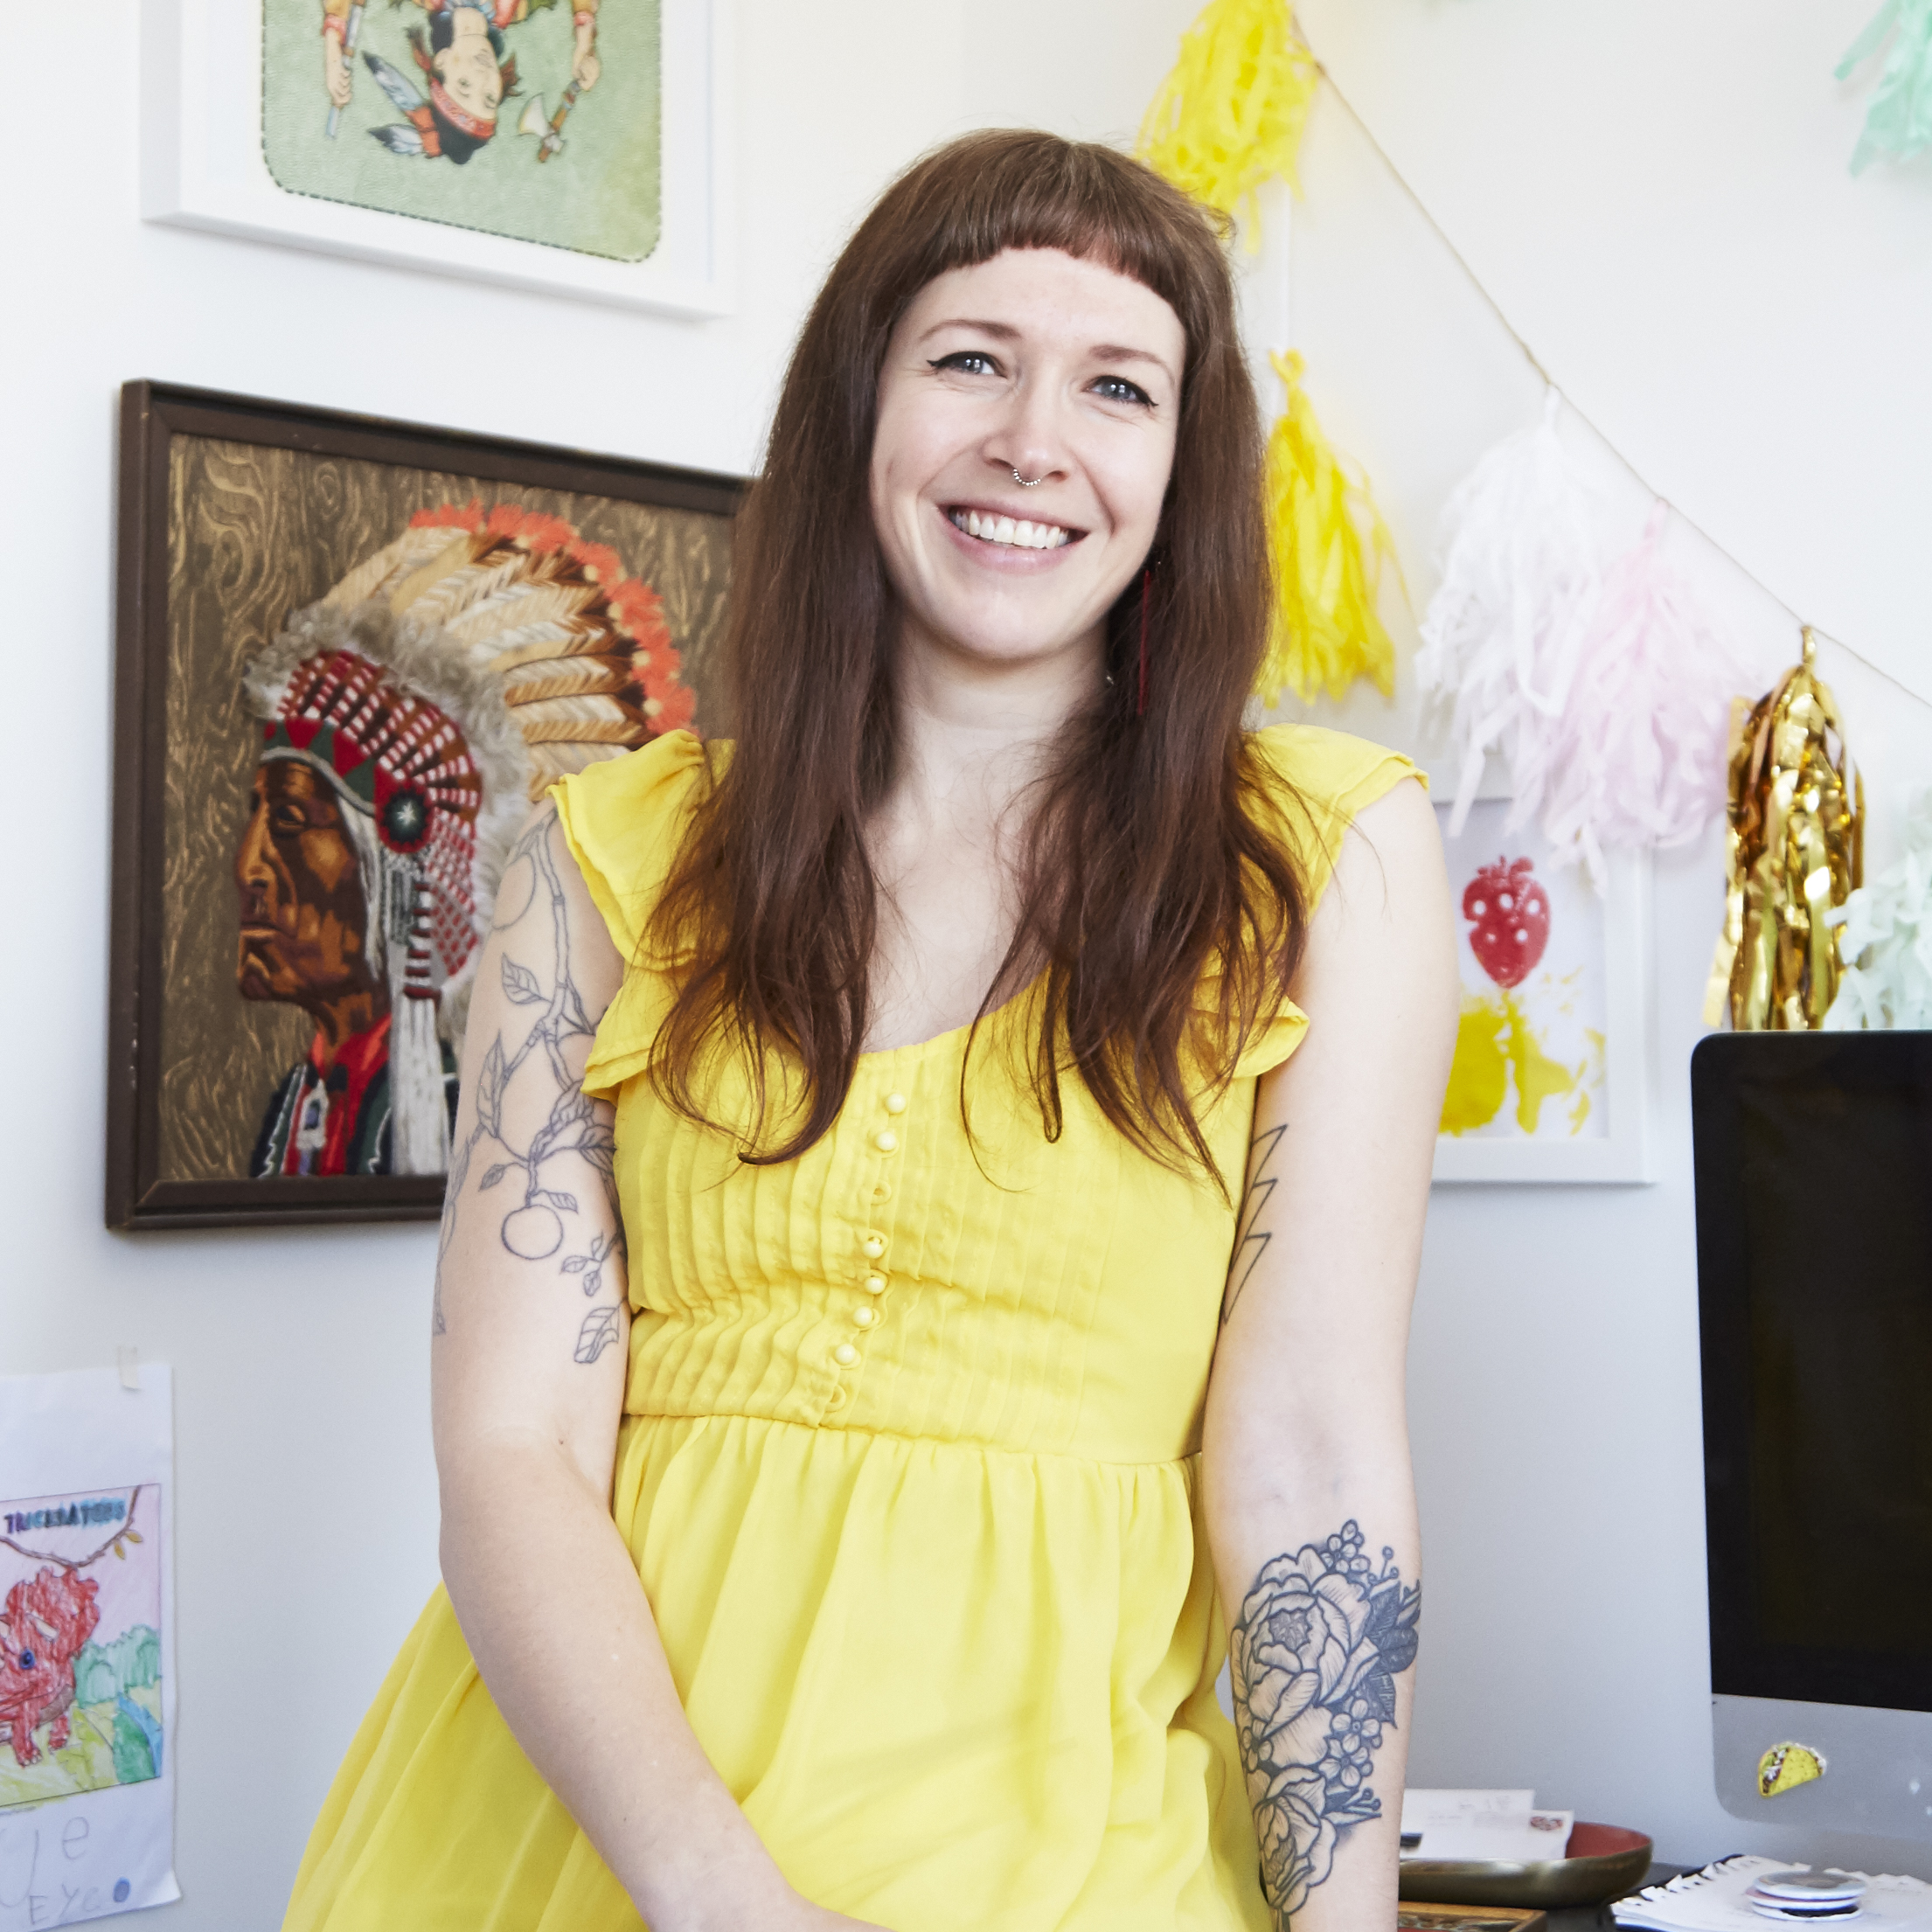 A light-skinned woman leans against a desk, smiling happily at the camera. She has straight, light-brown hair worn long to her breasts, with straight-cut bangs worn high on her forehead. She wears a yellow dress with ruffled sleeves and both arms have various tattoos. Behind her are various prints and artworks, most prominently an illustration of a Native American Chief in a headdress, shown in profile.